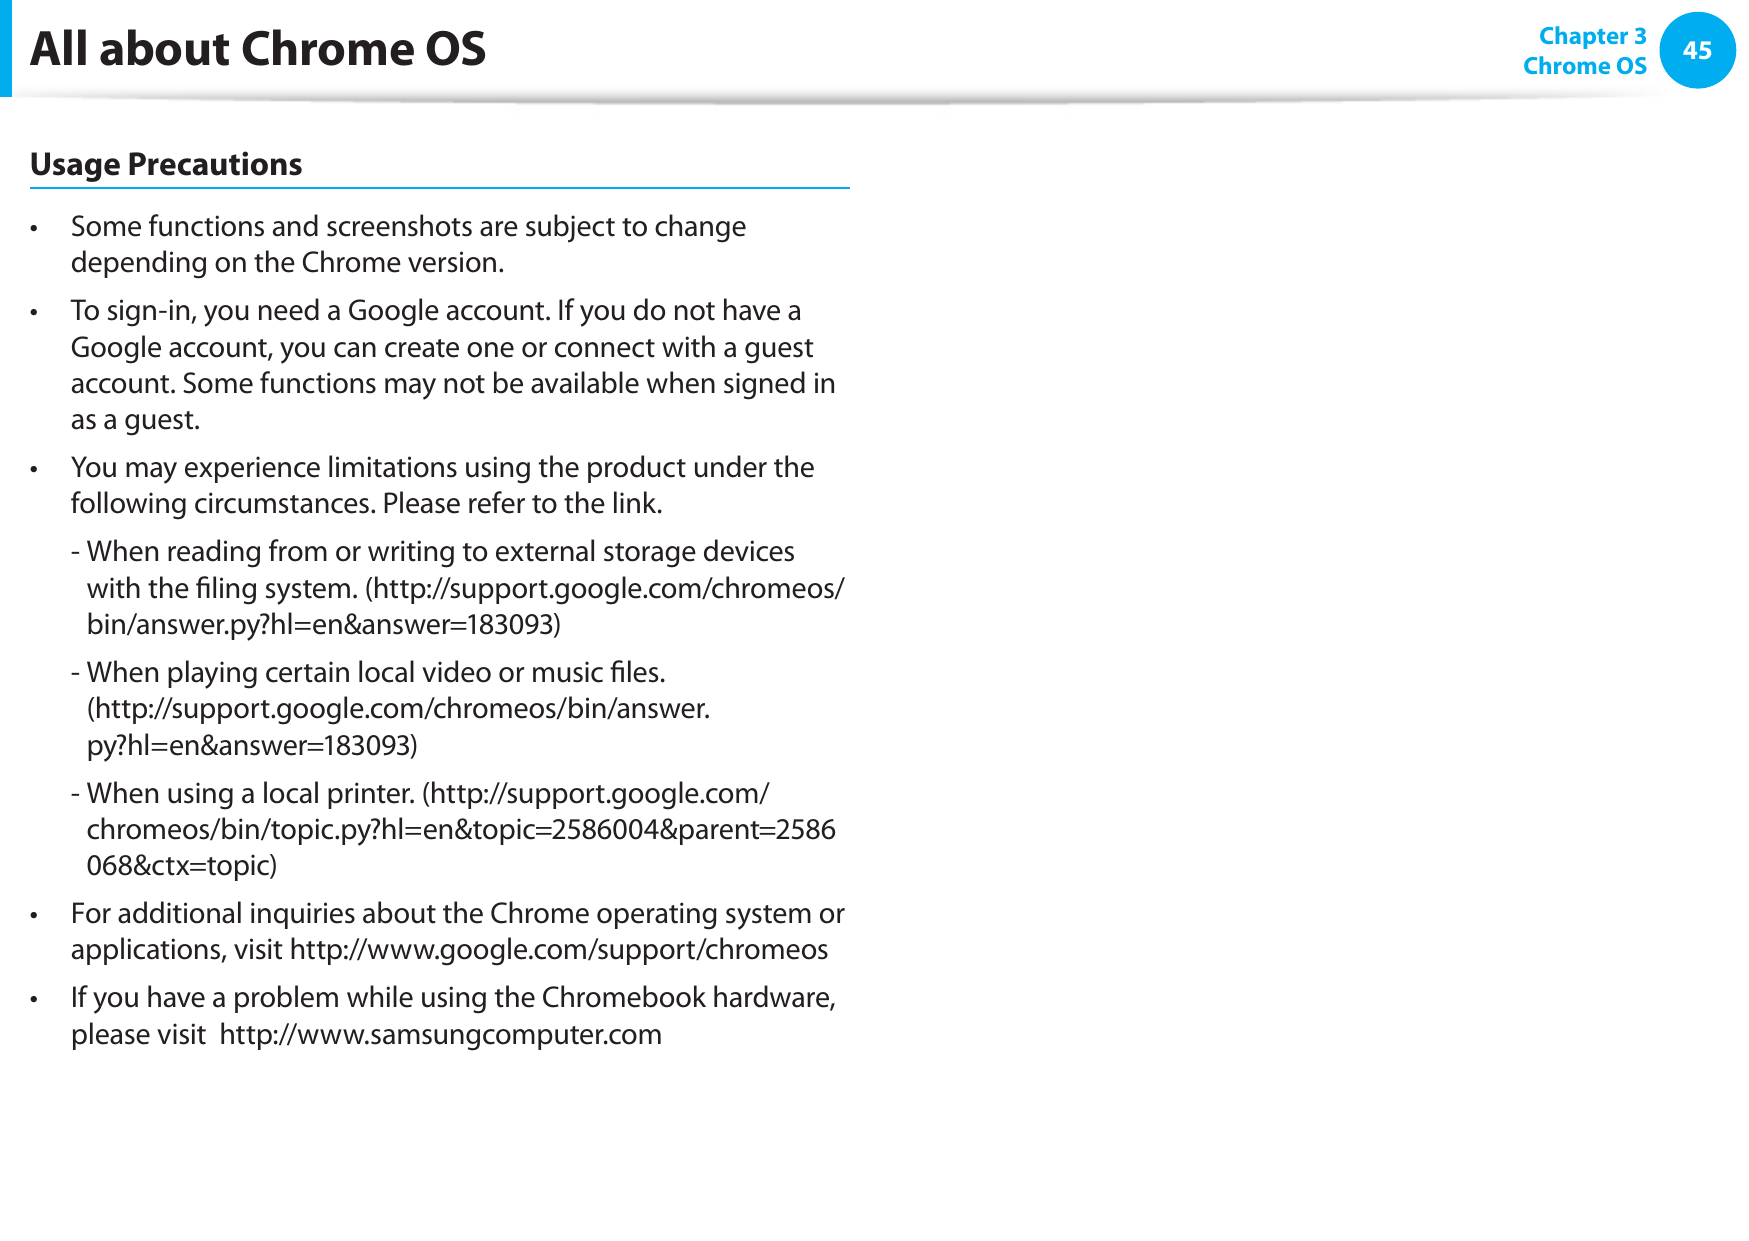 4445Chapter 3 Chrome OSAll about Chrome OSUsage PrecautionsSome functions and screenshots are subject to change • depending on the Chrome version.To sign-in, you need a Google account. If you do not have a • Google account, you can create one or connect with a guest account. Some functions may not be available when signed in as a guest.You may experience limitations using the product under the • following circumstances. Please refer to the link.-  When reading from or writing to external storage devices with the ling system. (http://support.google.com/chromeos/bin/answer.py?hl=en&amp;answer=183093)-  When playing certain local video or music les. (http://support.google.com/chromeos/bin/answer.py?hl=en&amp;answer=183093)-  When using a local printer. (http://support.google.com/chromeos/bin/topic.py?hl=en&amp;topic=2586004&amp;parent=2586068&amp;ctx=topic)For additional inquiries about the Chrome operating system or • applications, visit http://www.google.com/support/chromeosIf you have a problem while using the Chromebook hardware, • please visit  http://www.samsungcomputer.com